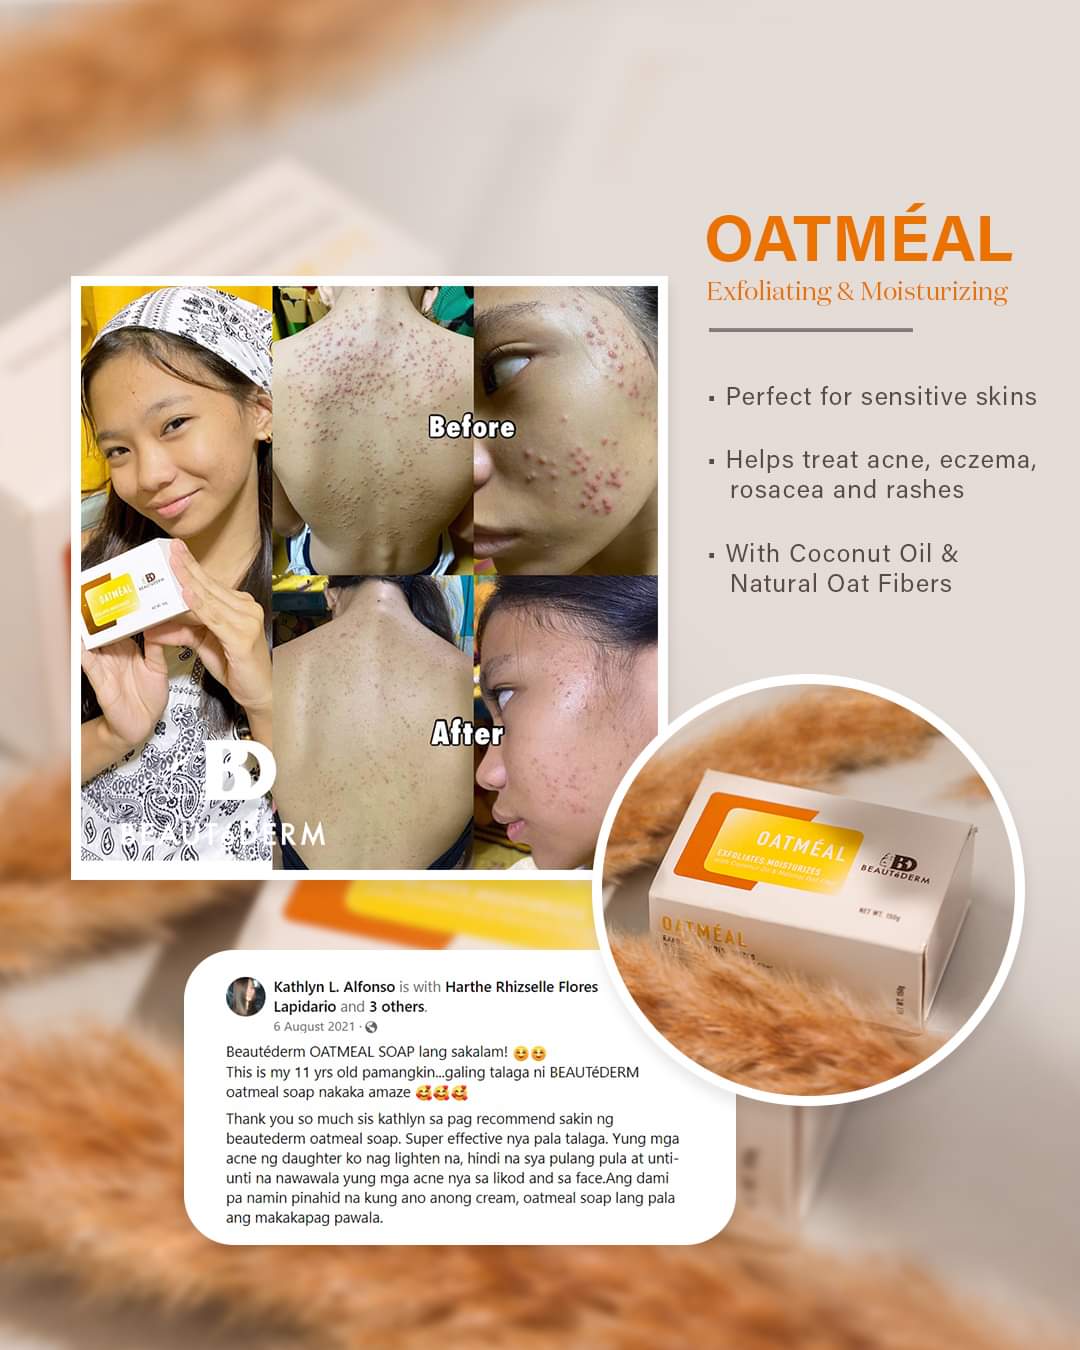 Beautederm Oatmeal Soap with Coconut Oil & Natural Oat Fiber Story Testimonial